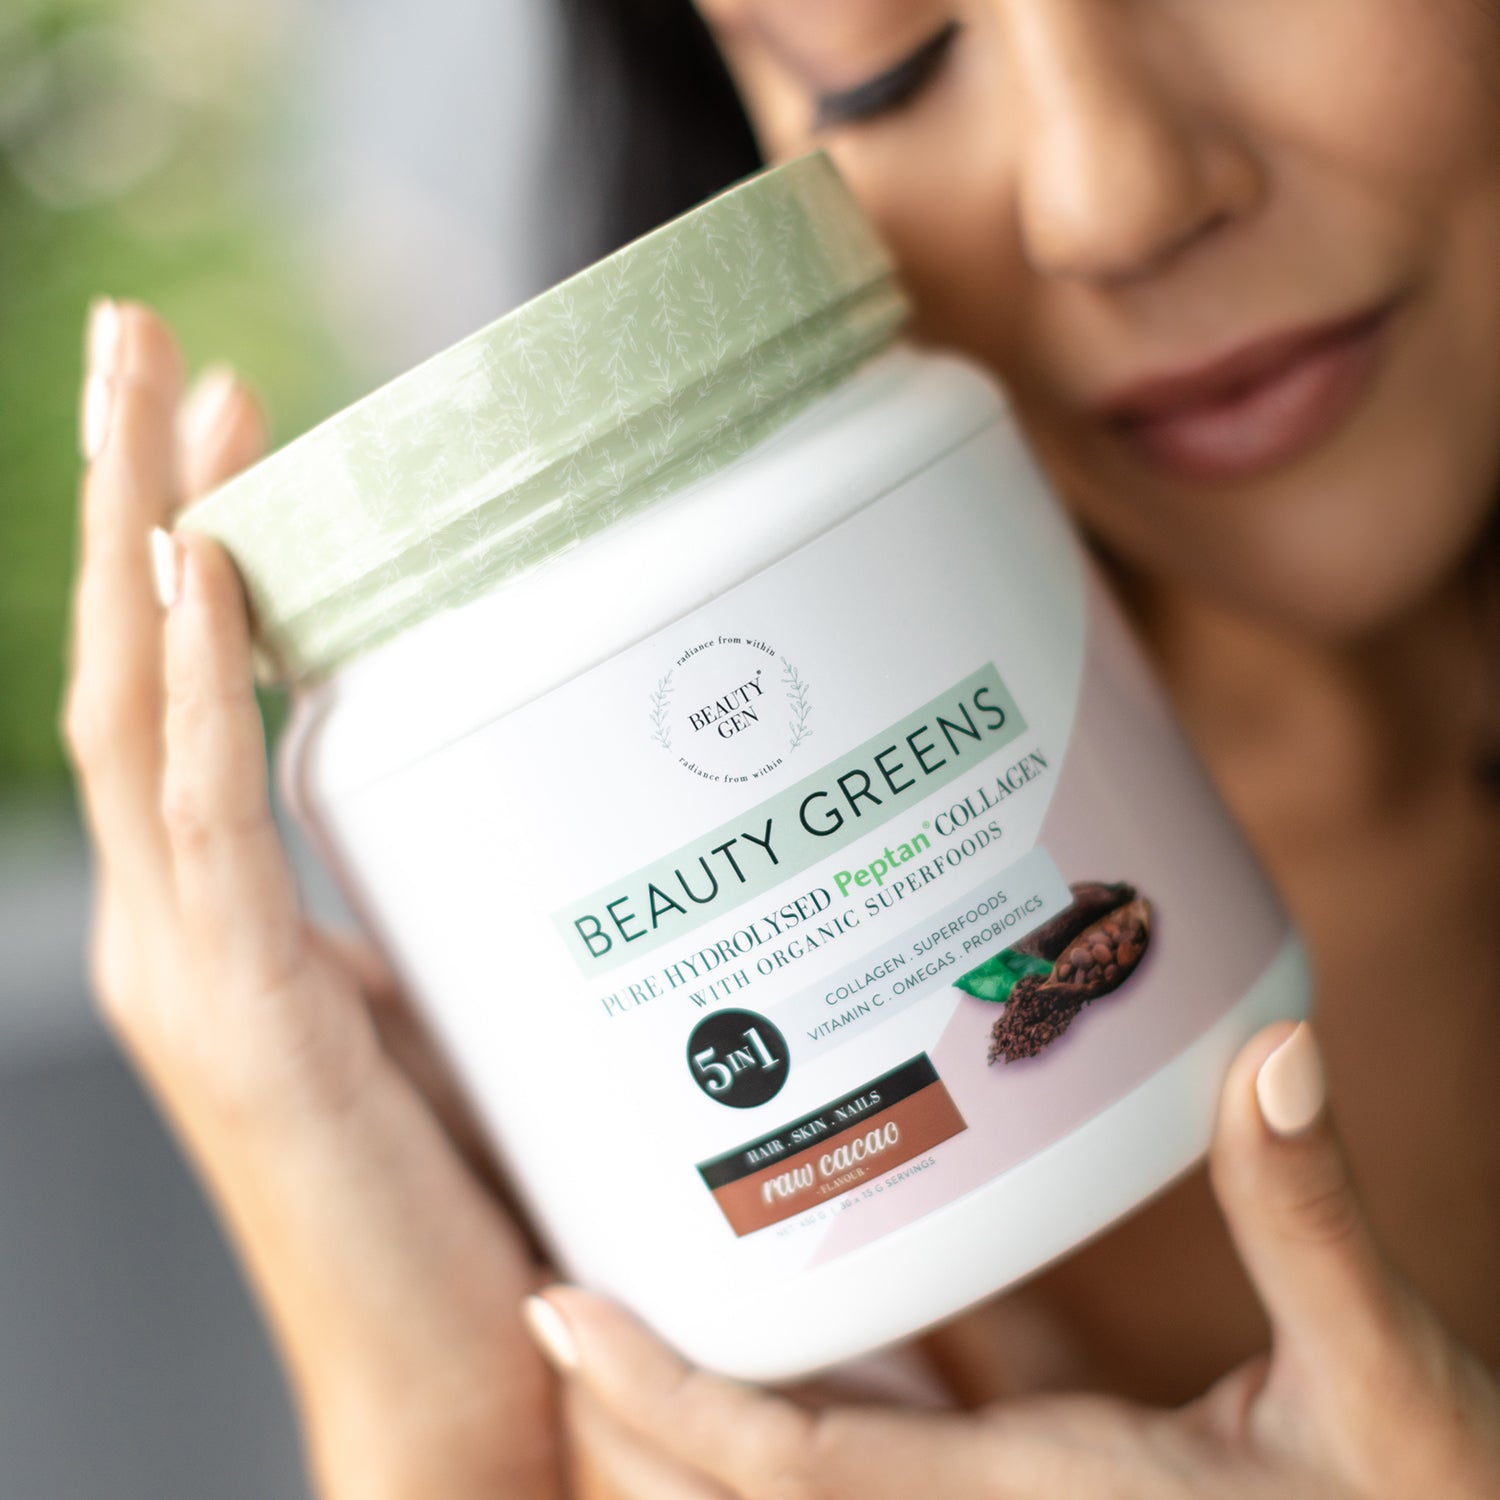 Beauty Greens® | Raw Cacao - well i am store